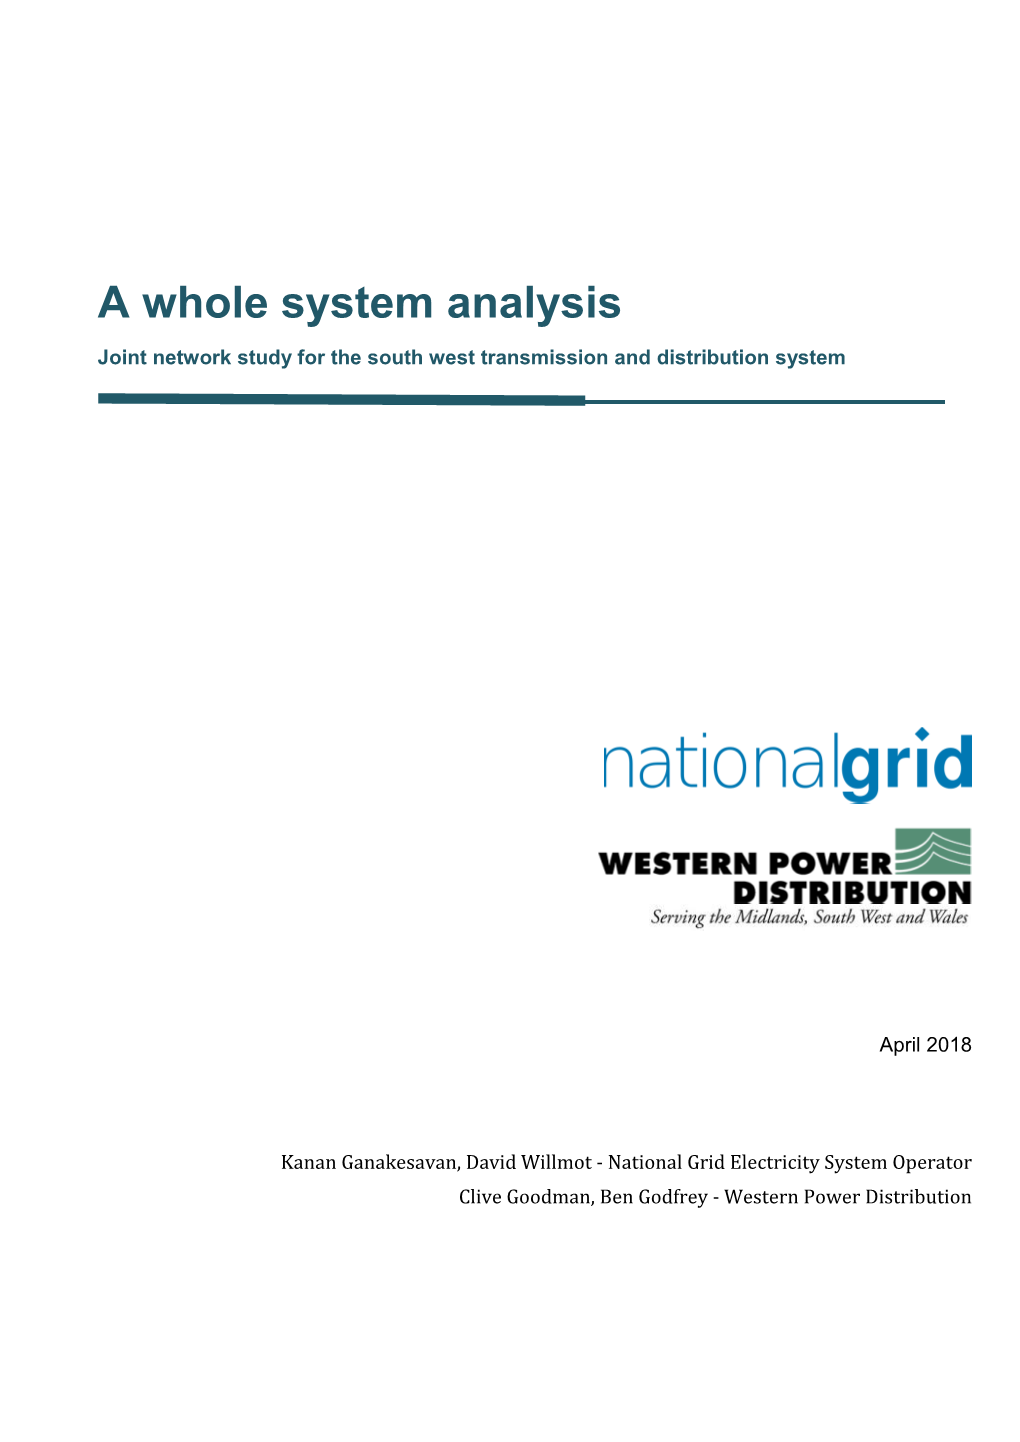 A Whole System Analysis